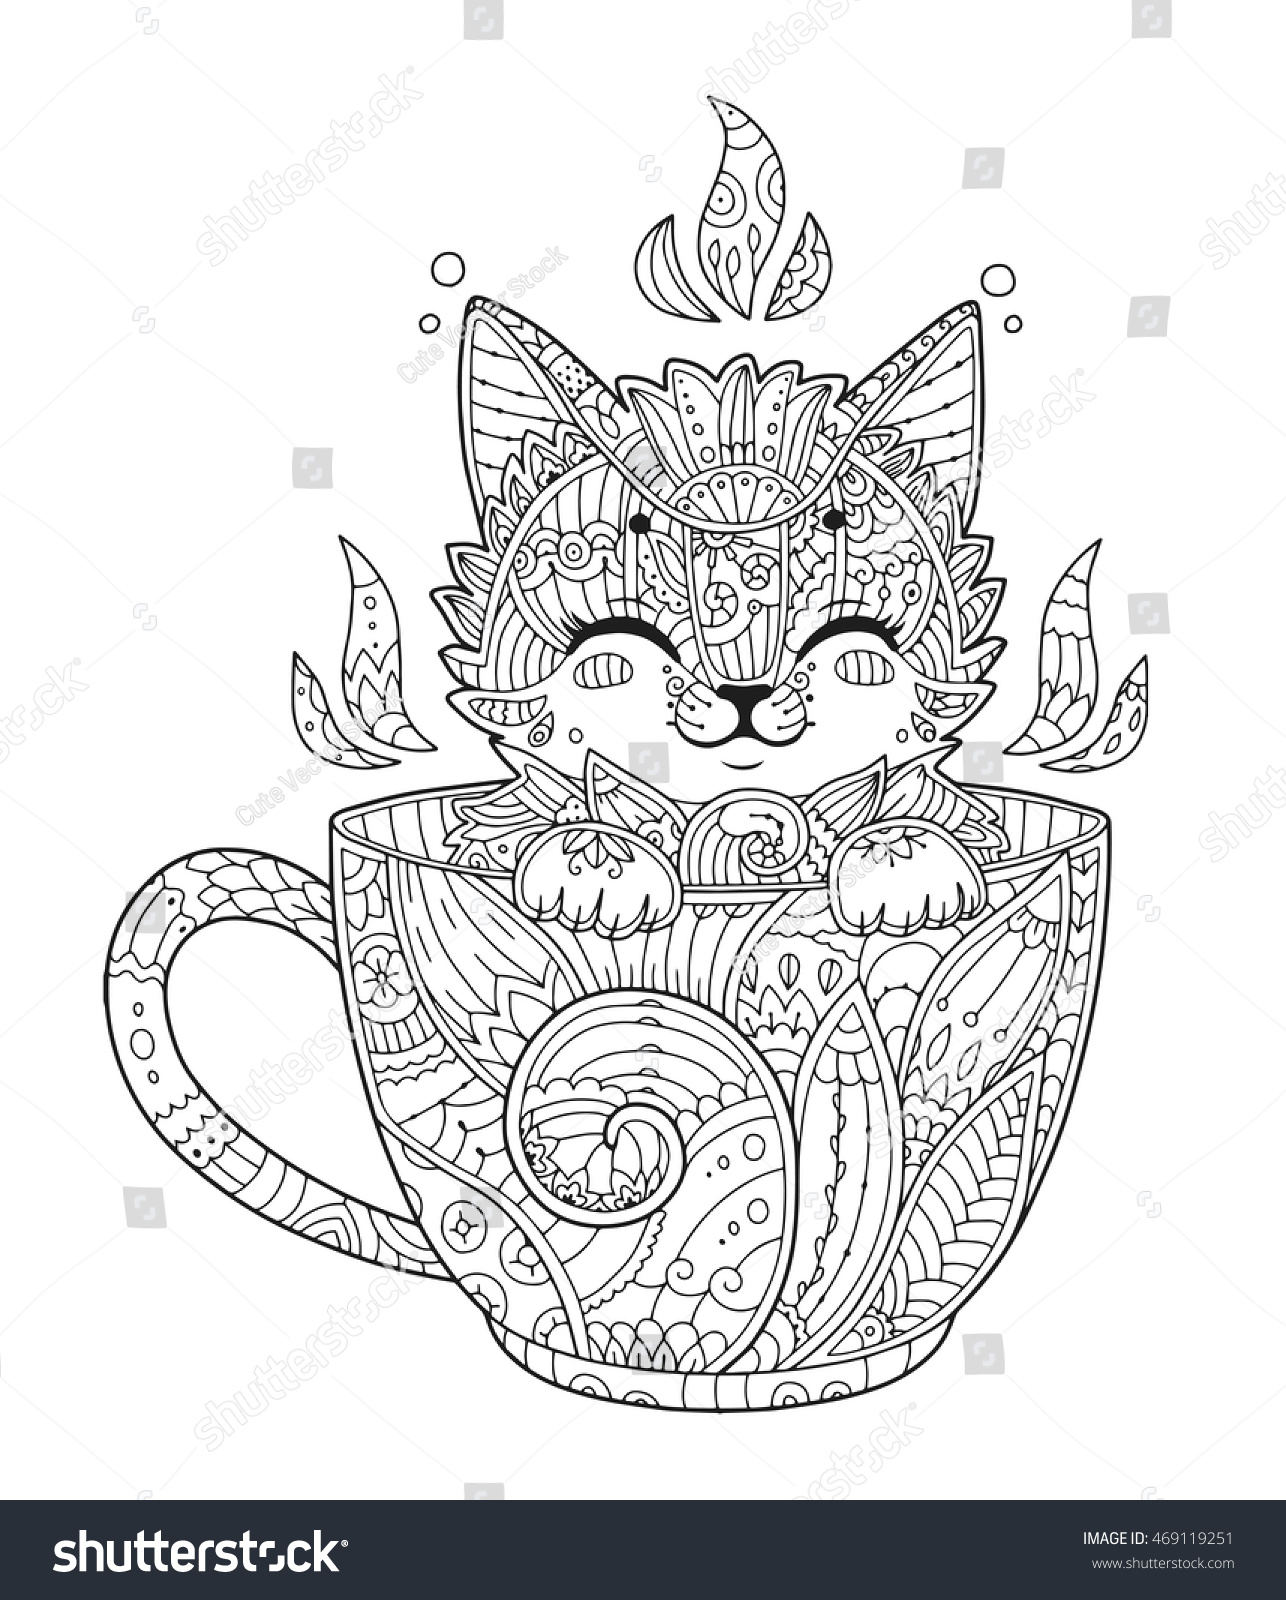 Download Kitten Cup Adult Antistress Coloring Page Stock Vector ...